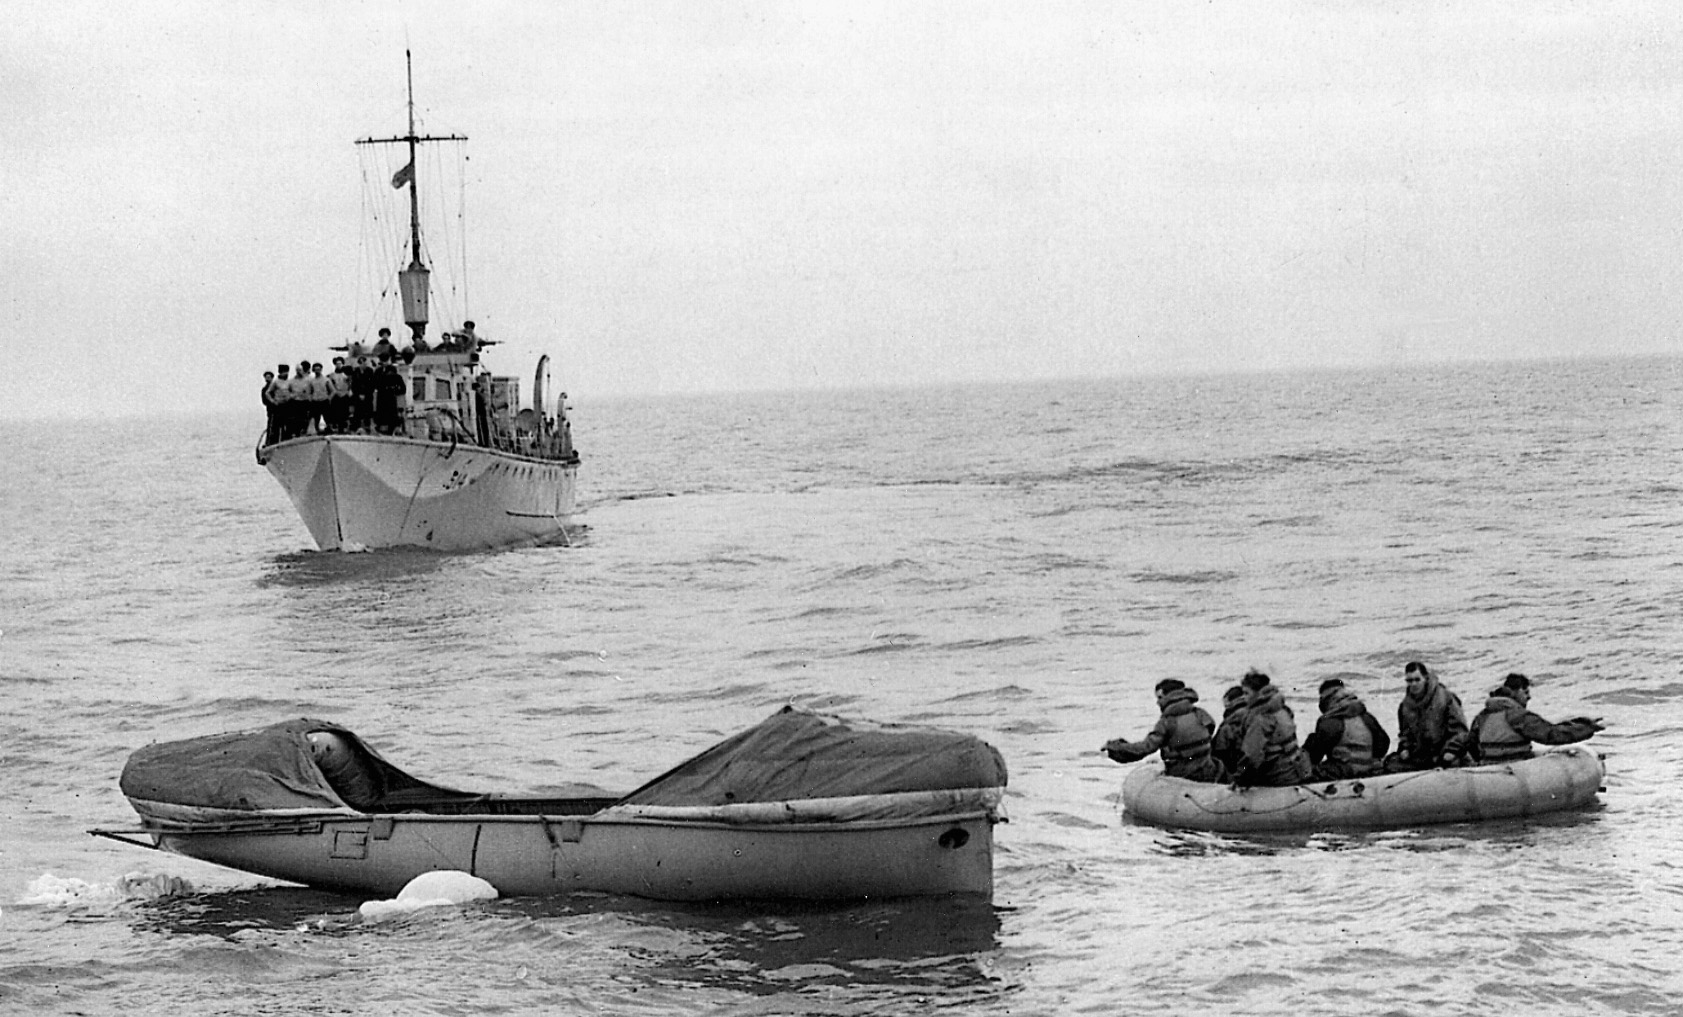 In a test maneuver, a raft filled with six men approaches a lifeboat under the watchful eyes of Navy comrades. 